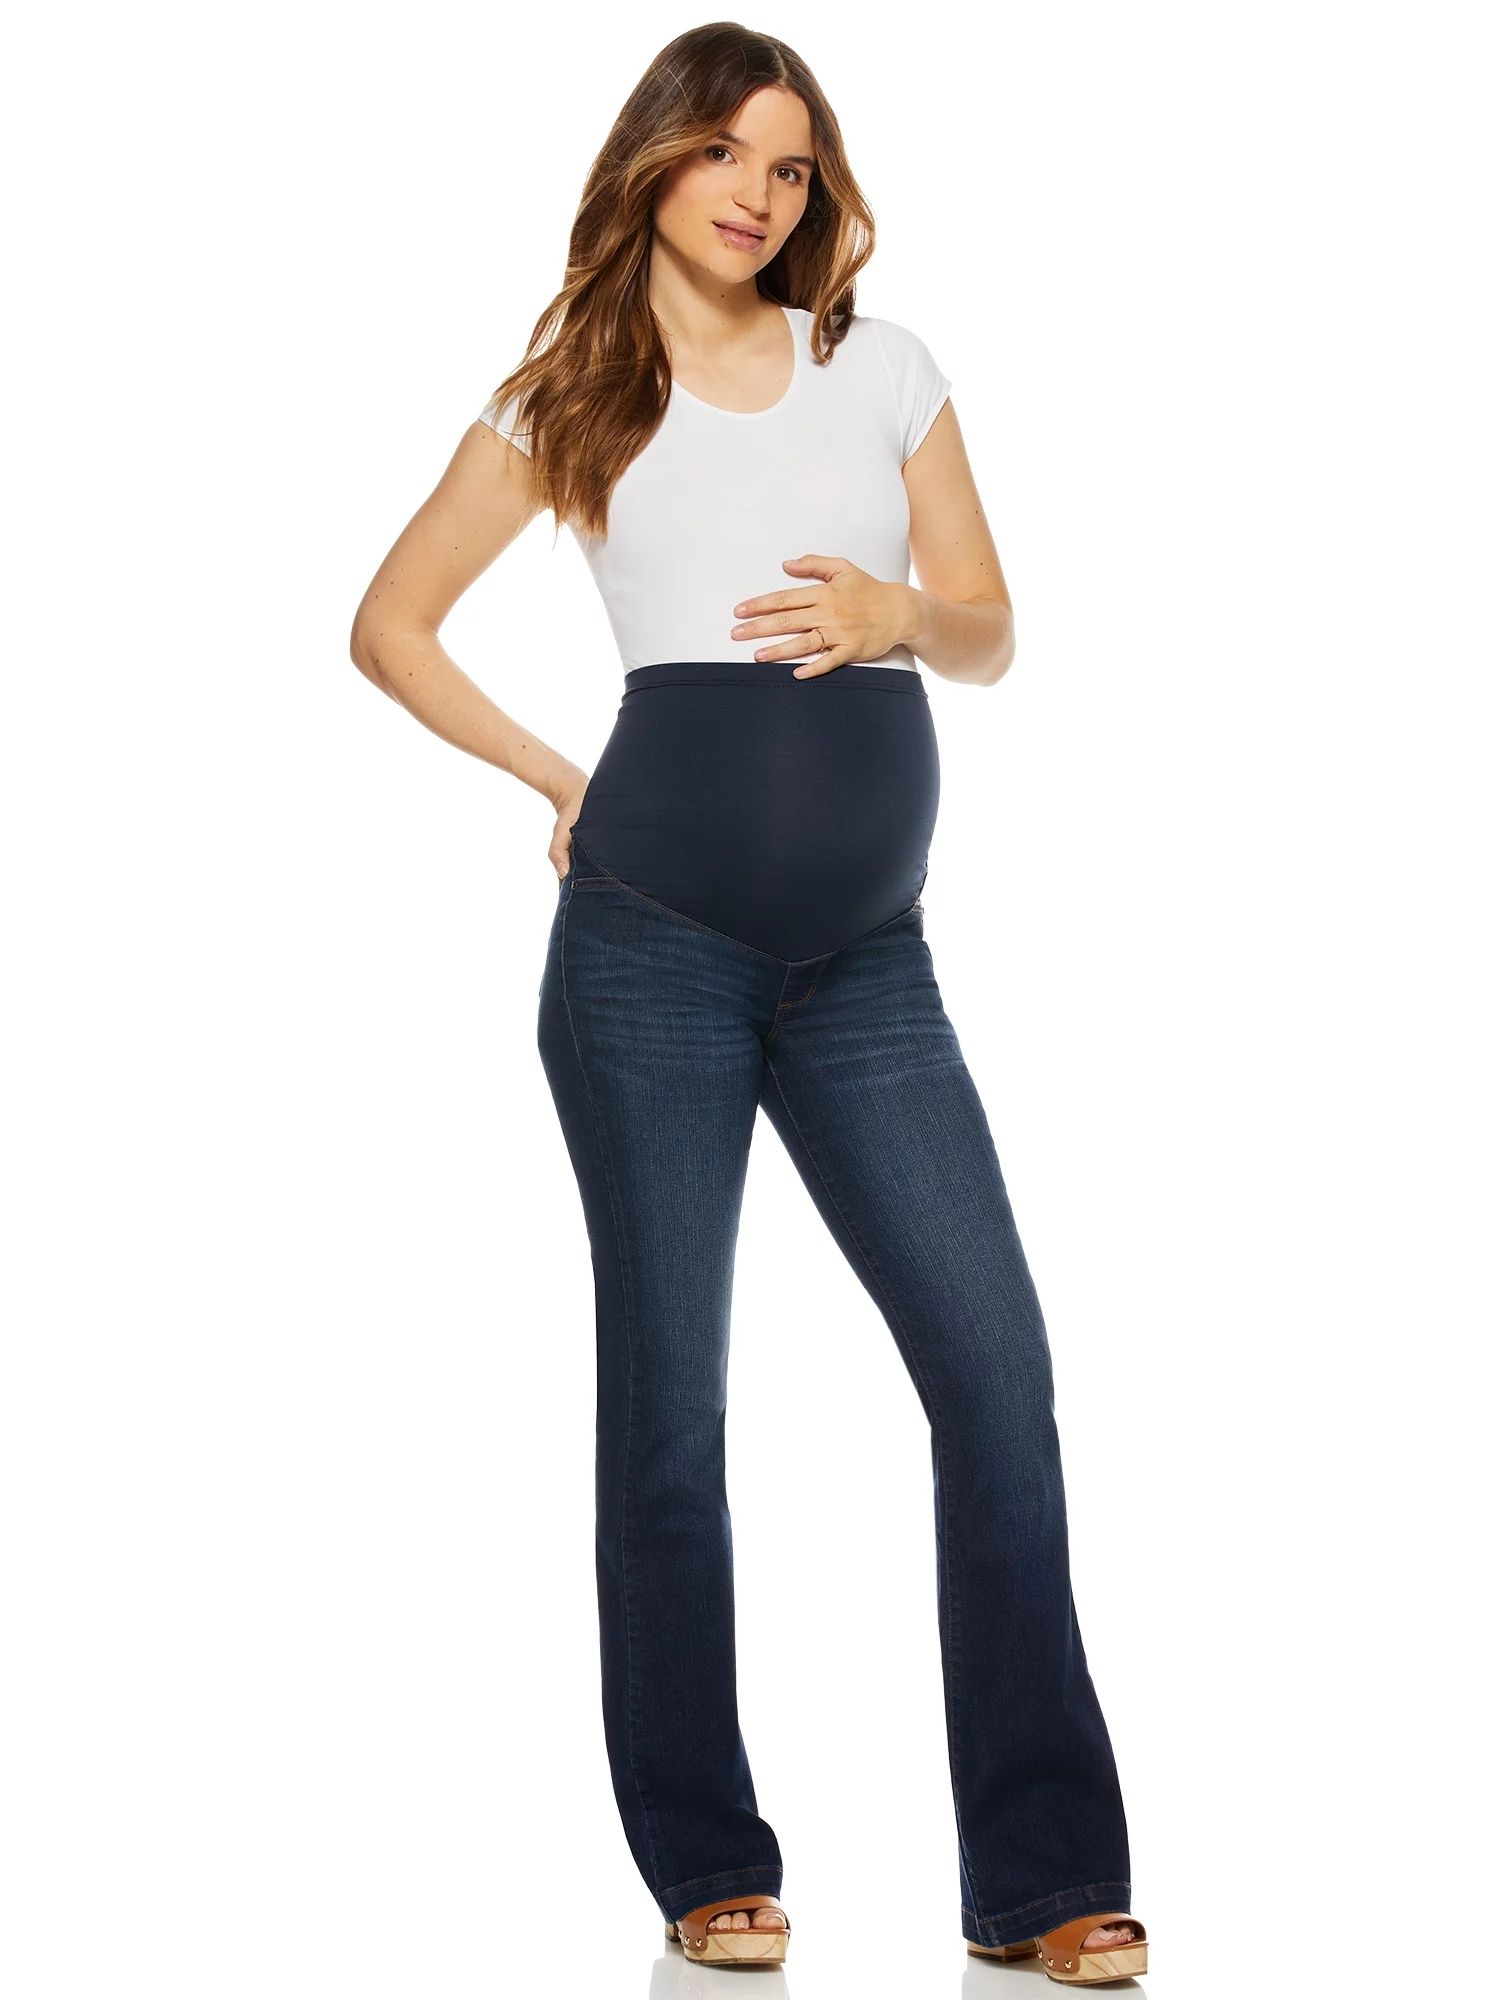 Sofia Jeans by Sofia Vergara Women's Maternity Melisa Jeans with Full Belly Band | Walmart (US)